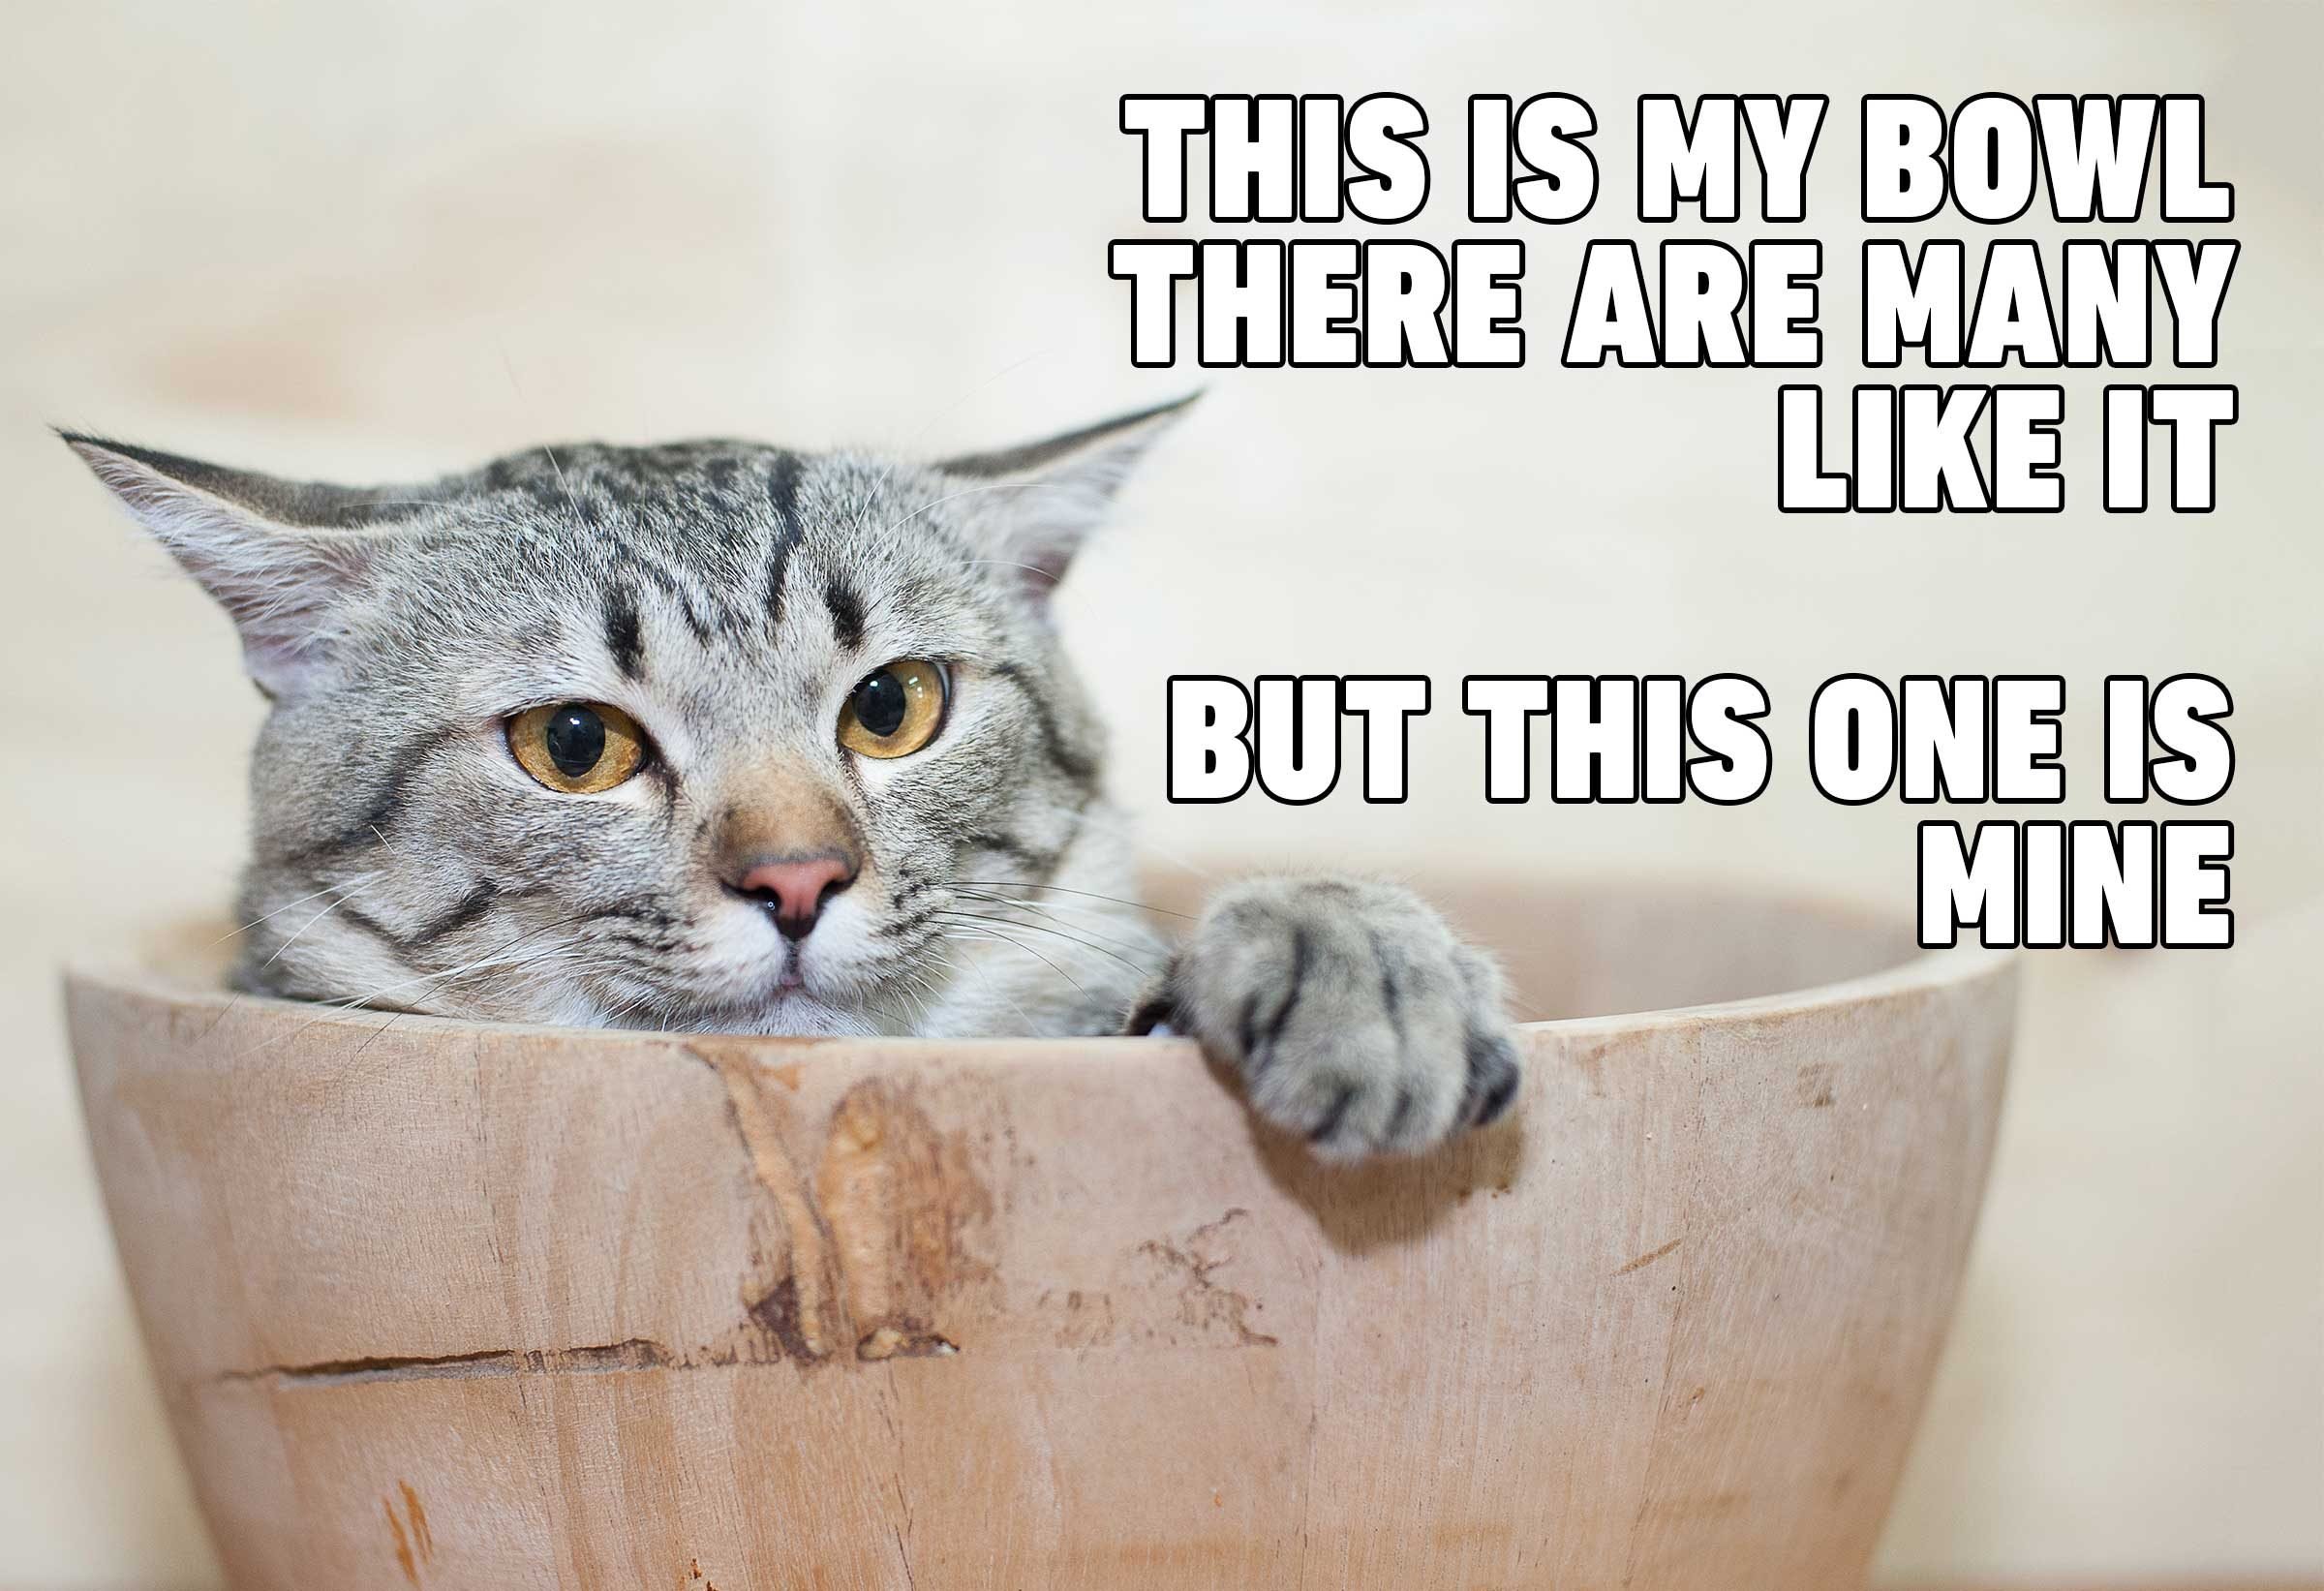 Cat Memes You'll Laugh at Every Time | Reader's Digest